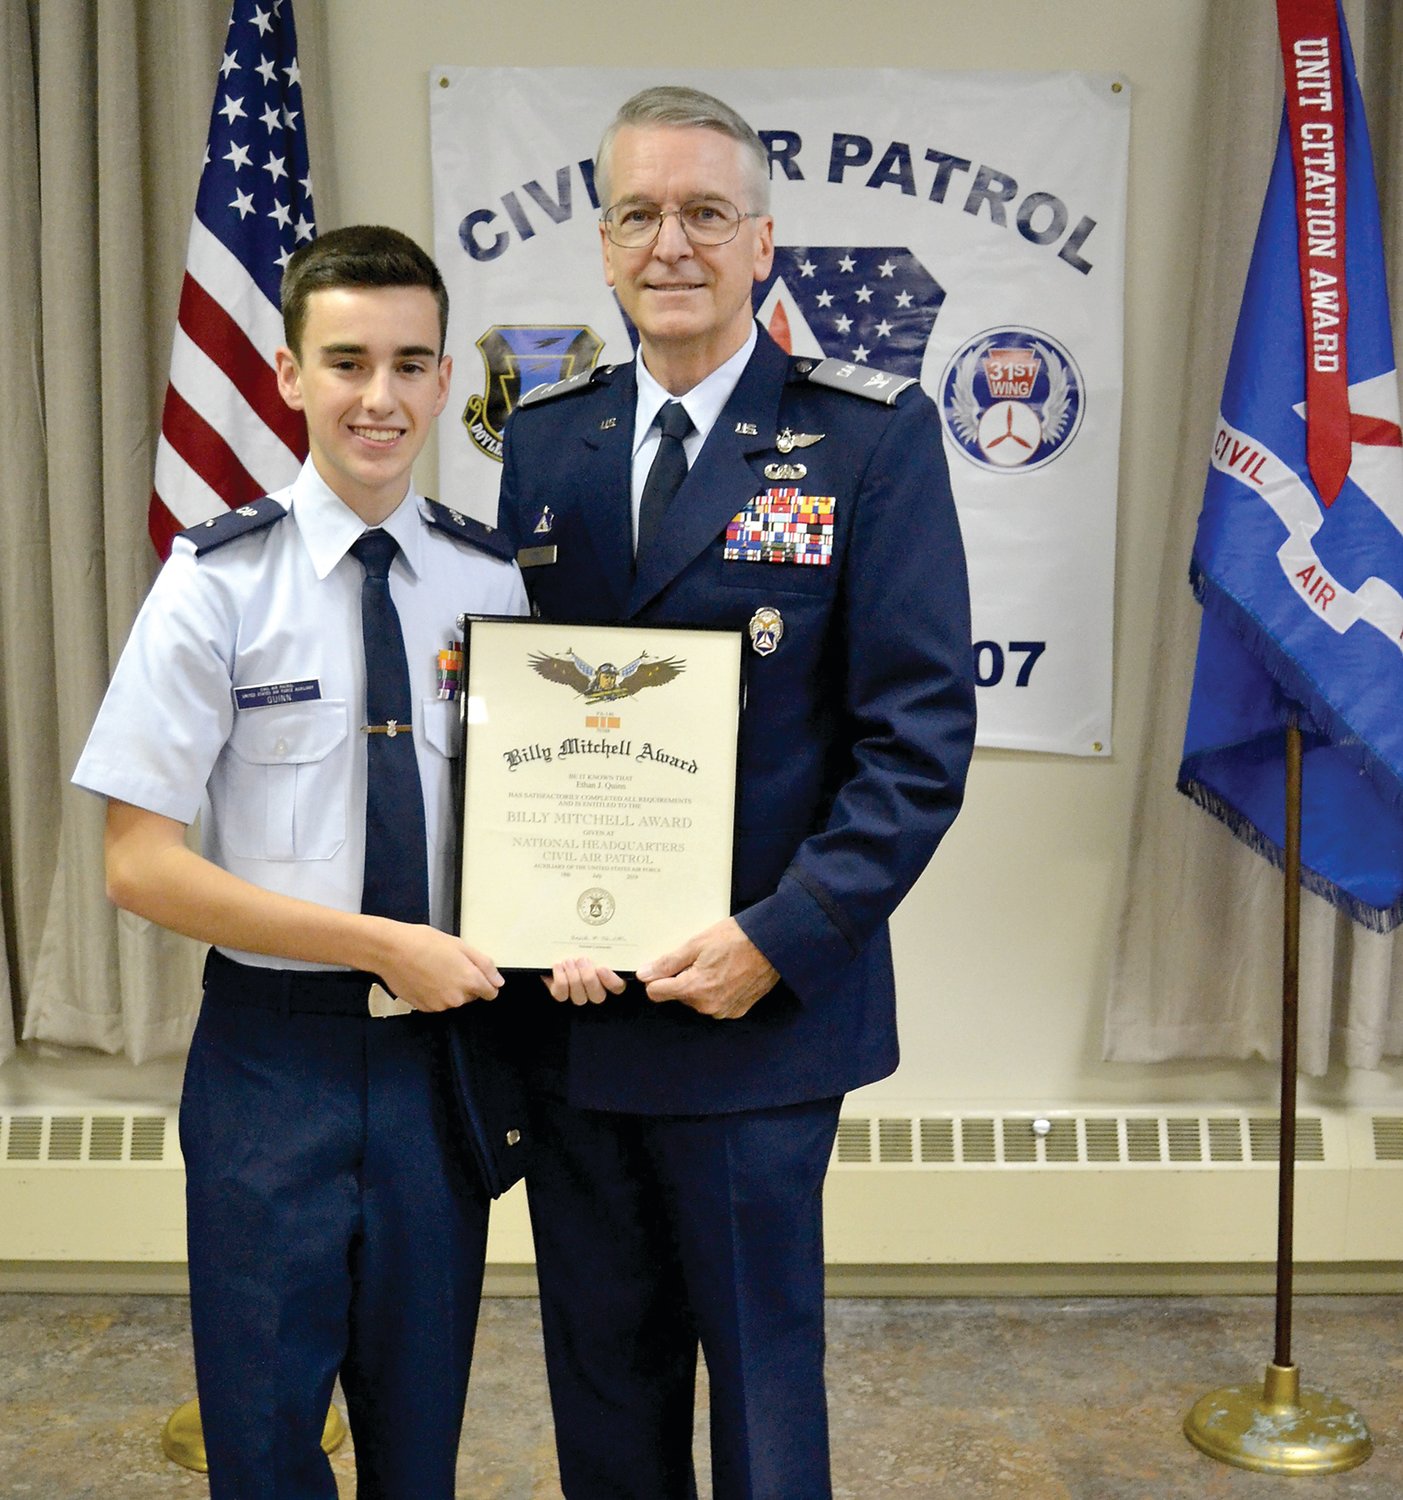 Cadet 2nd Lt. Ethan Quinn Ethan Quinn accepts the Billy Mitchell Award from Col. Kevin J. Berry, commander of the Pennsylvania Wing of the CAP. Photograph by C. Quinn.